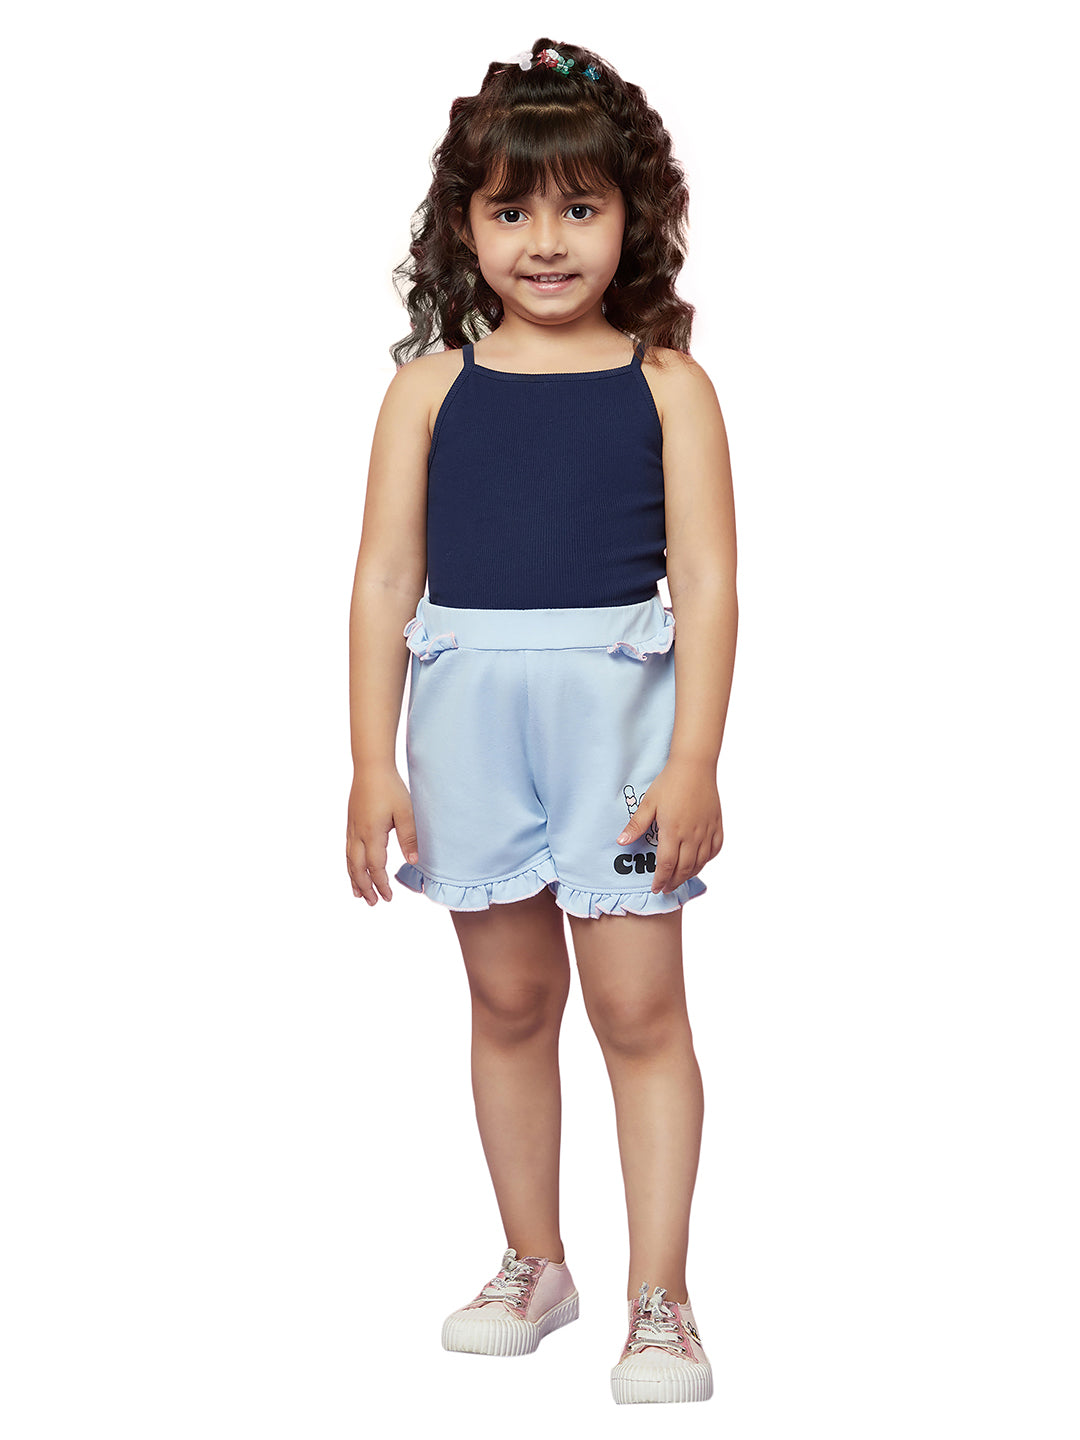 Kids Navy Blue Sleeveless Top with Funky Printed Shorts